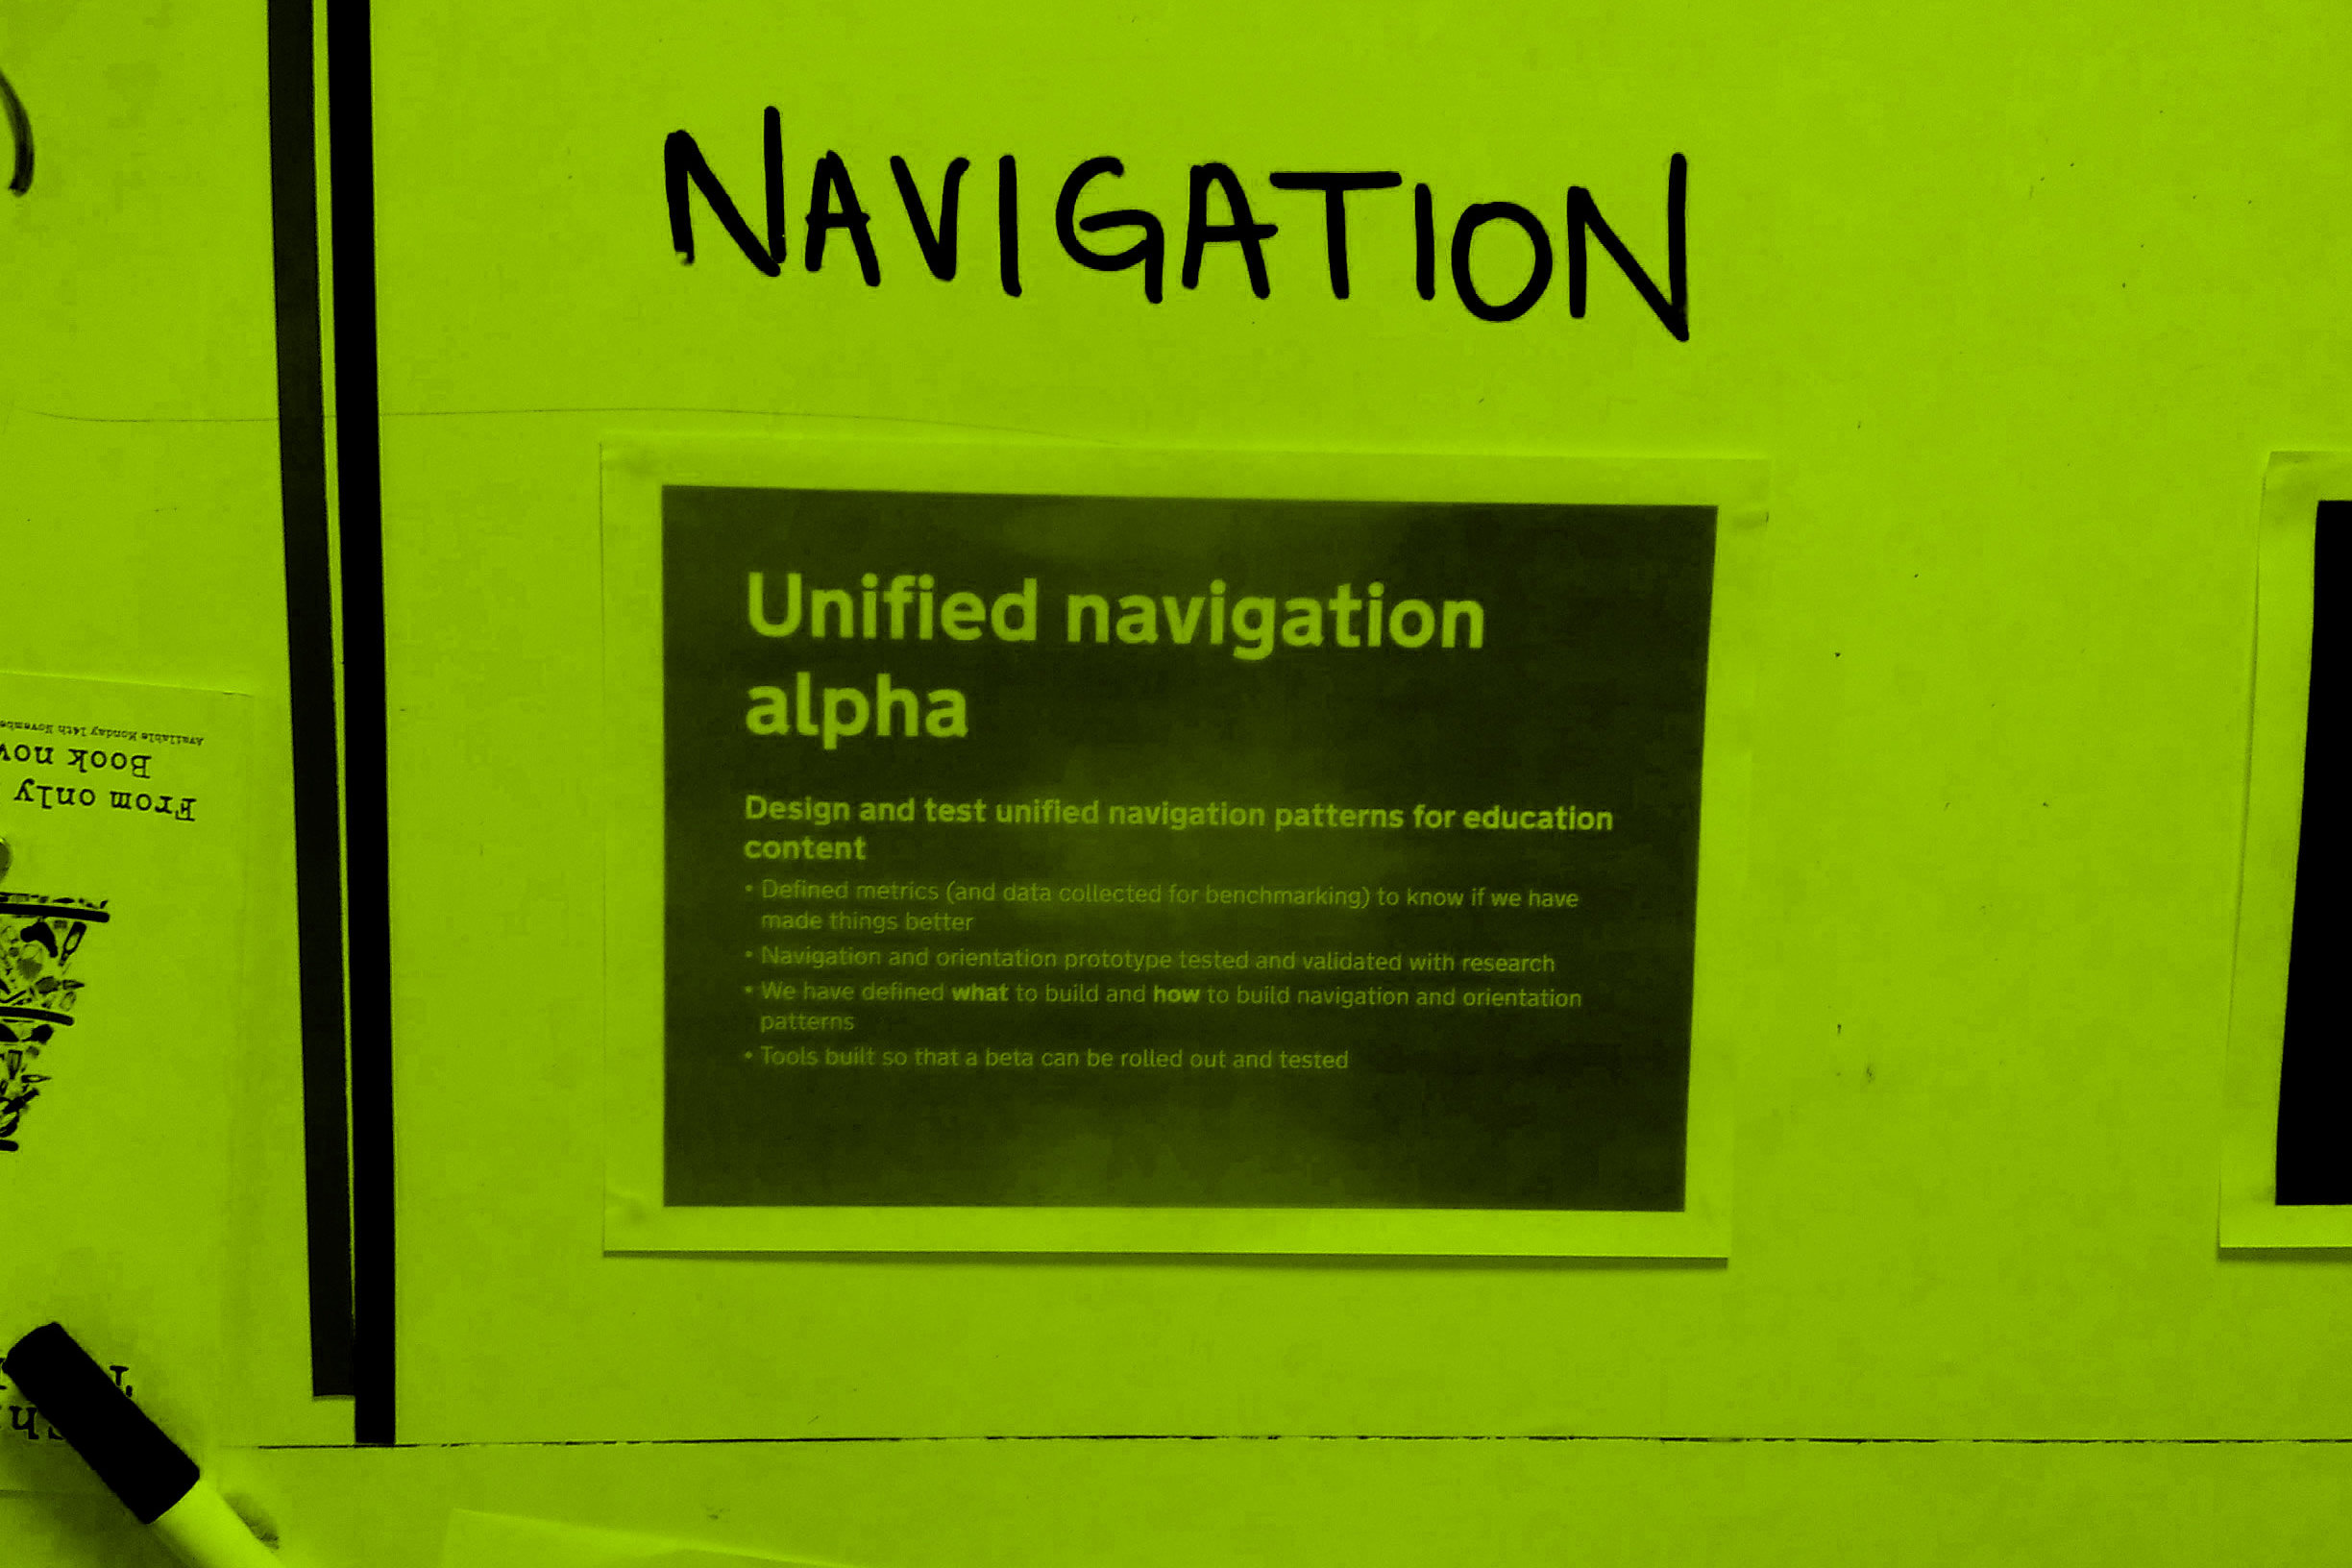 The mission statement for the navigation alpha printed on a sheet of paper and stuck on the wall